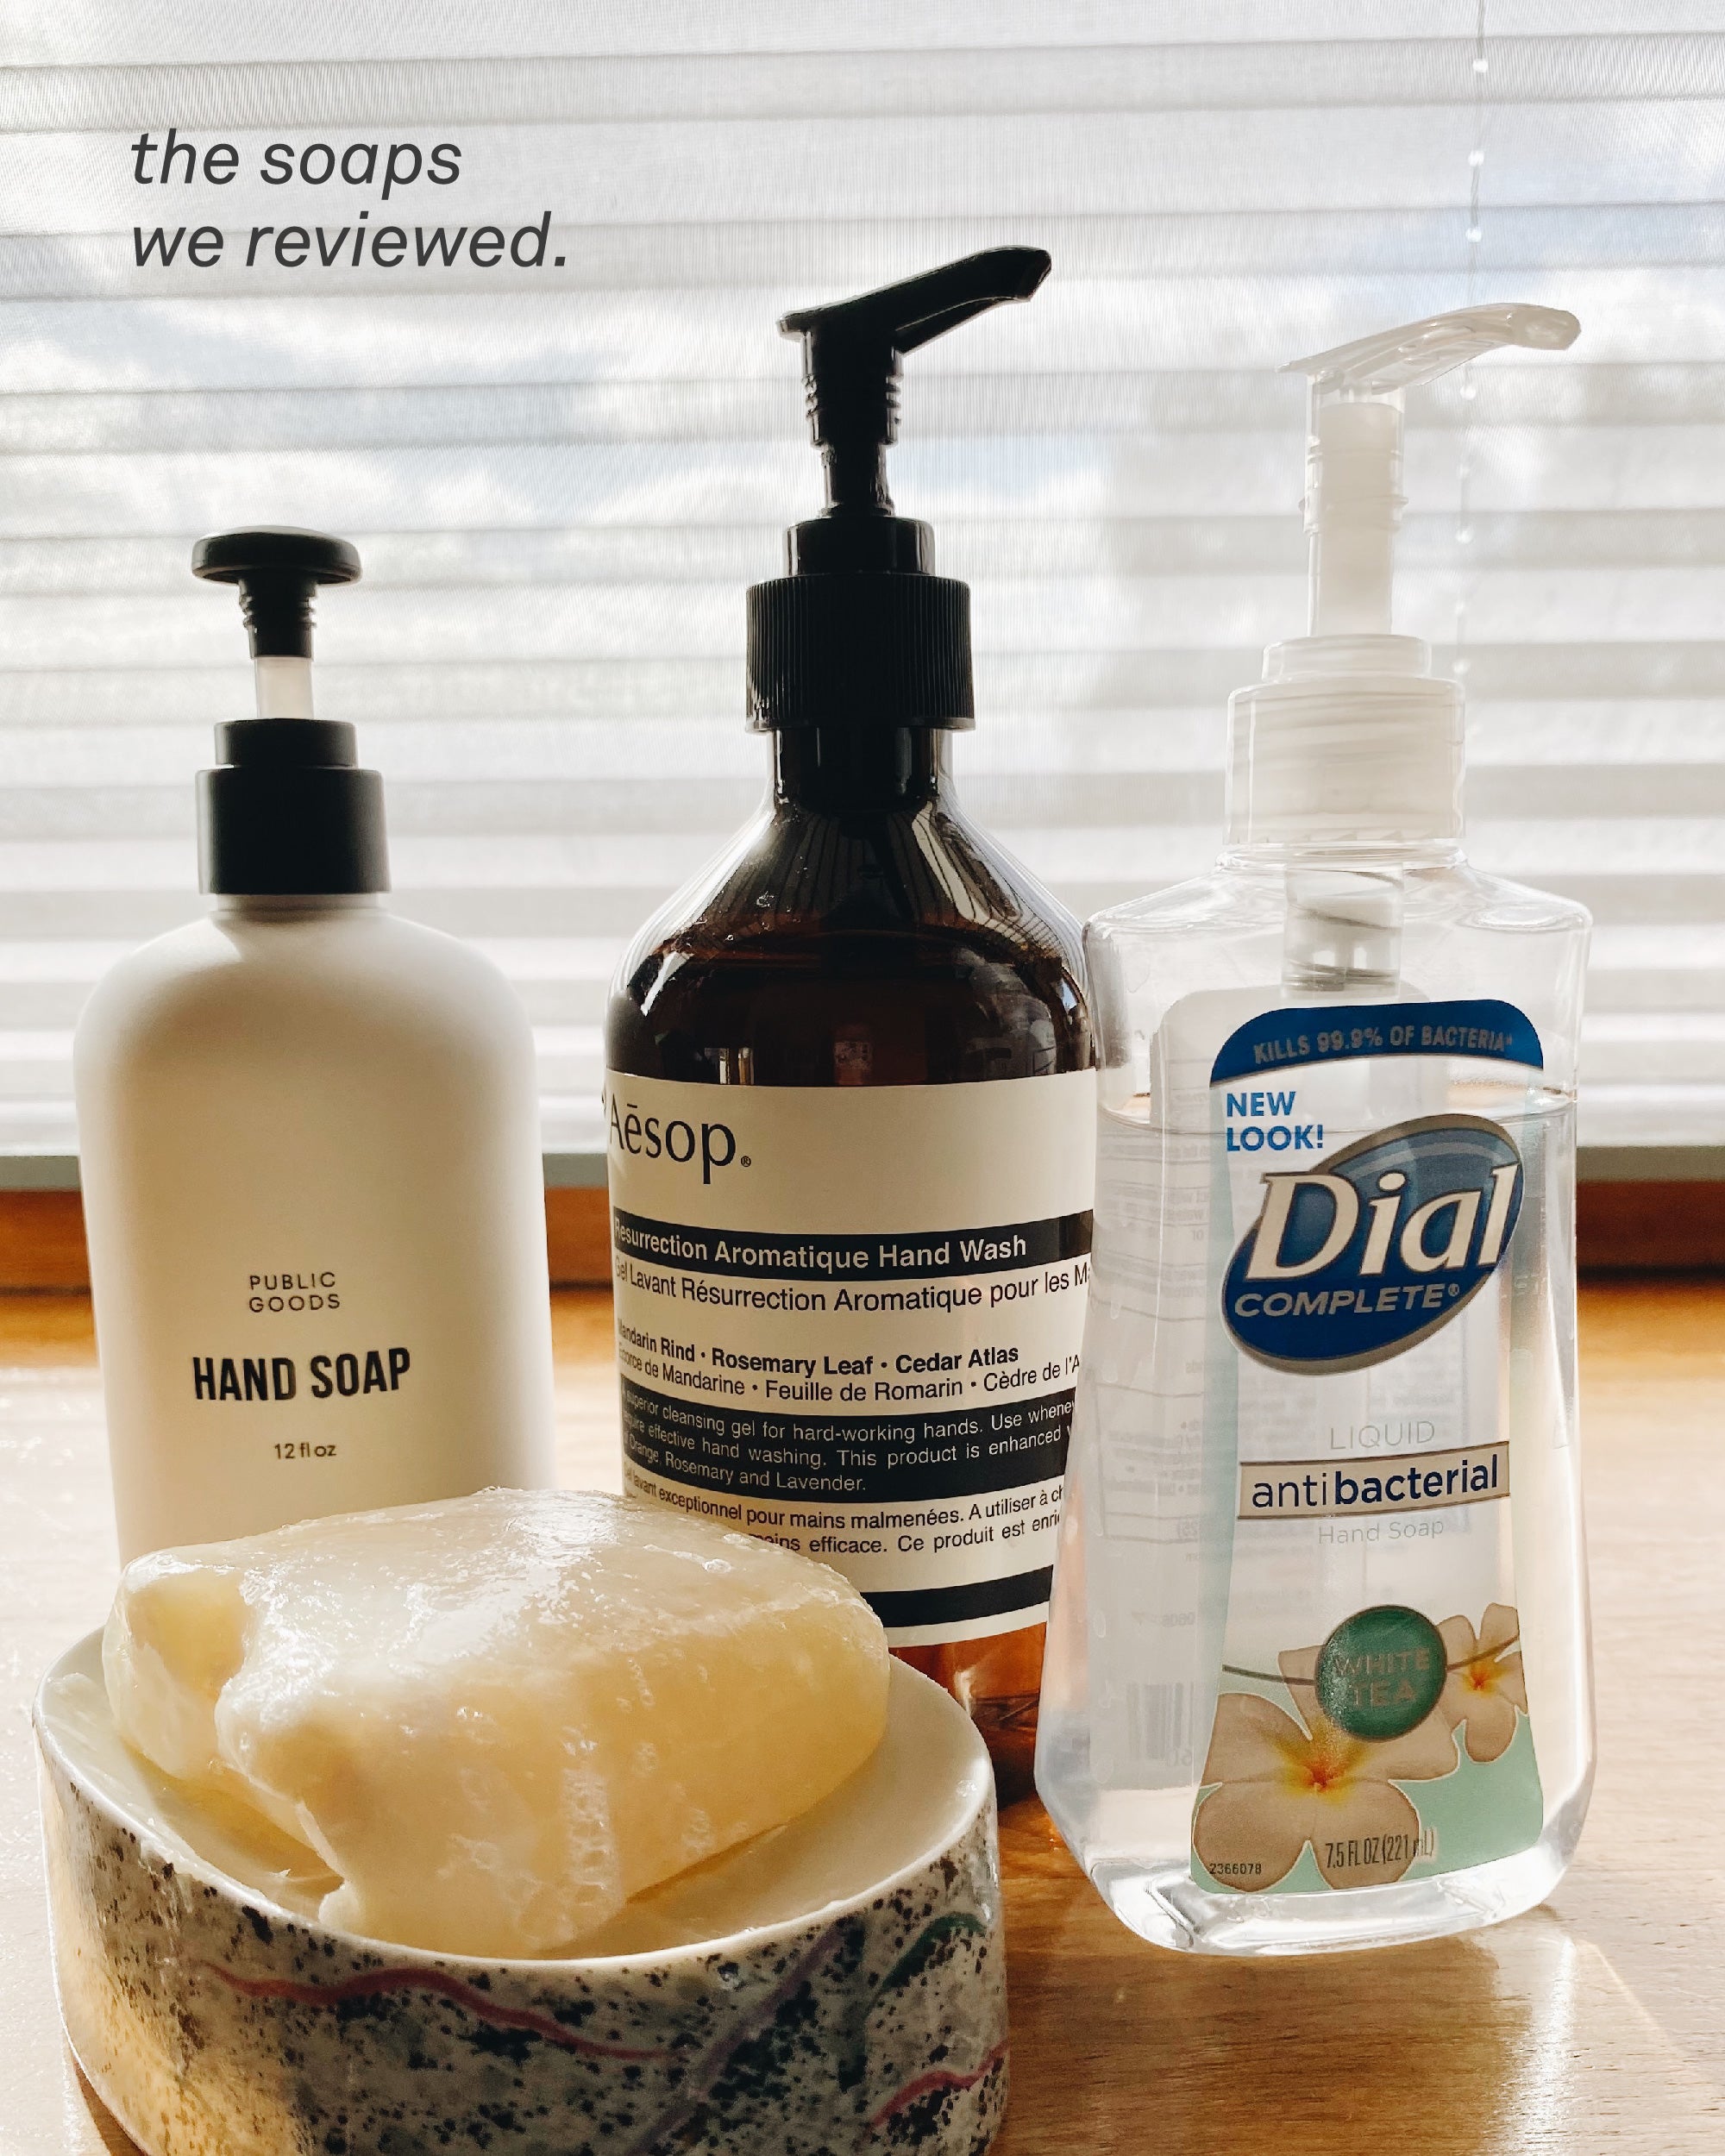 Public Goods, Aesop, Dial, and Lush hand soaps we reviewed